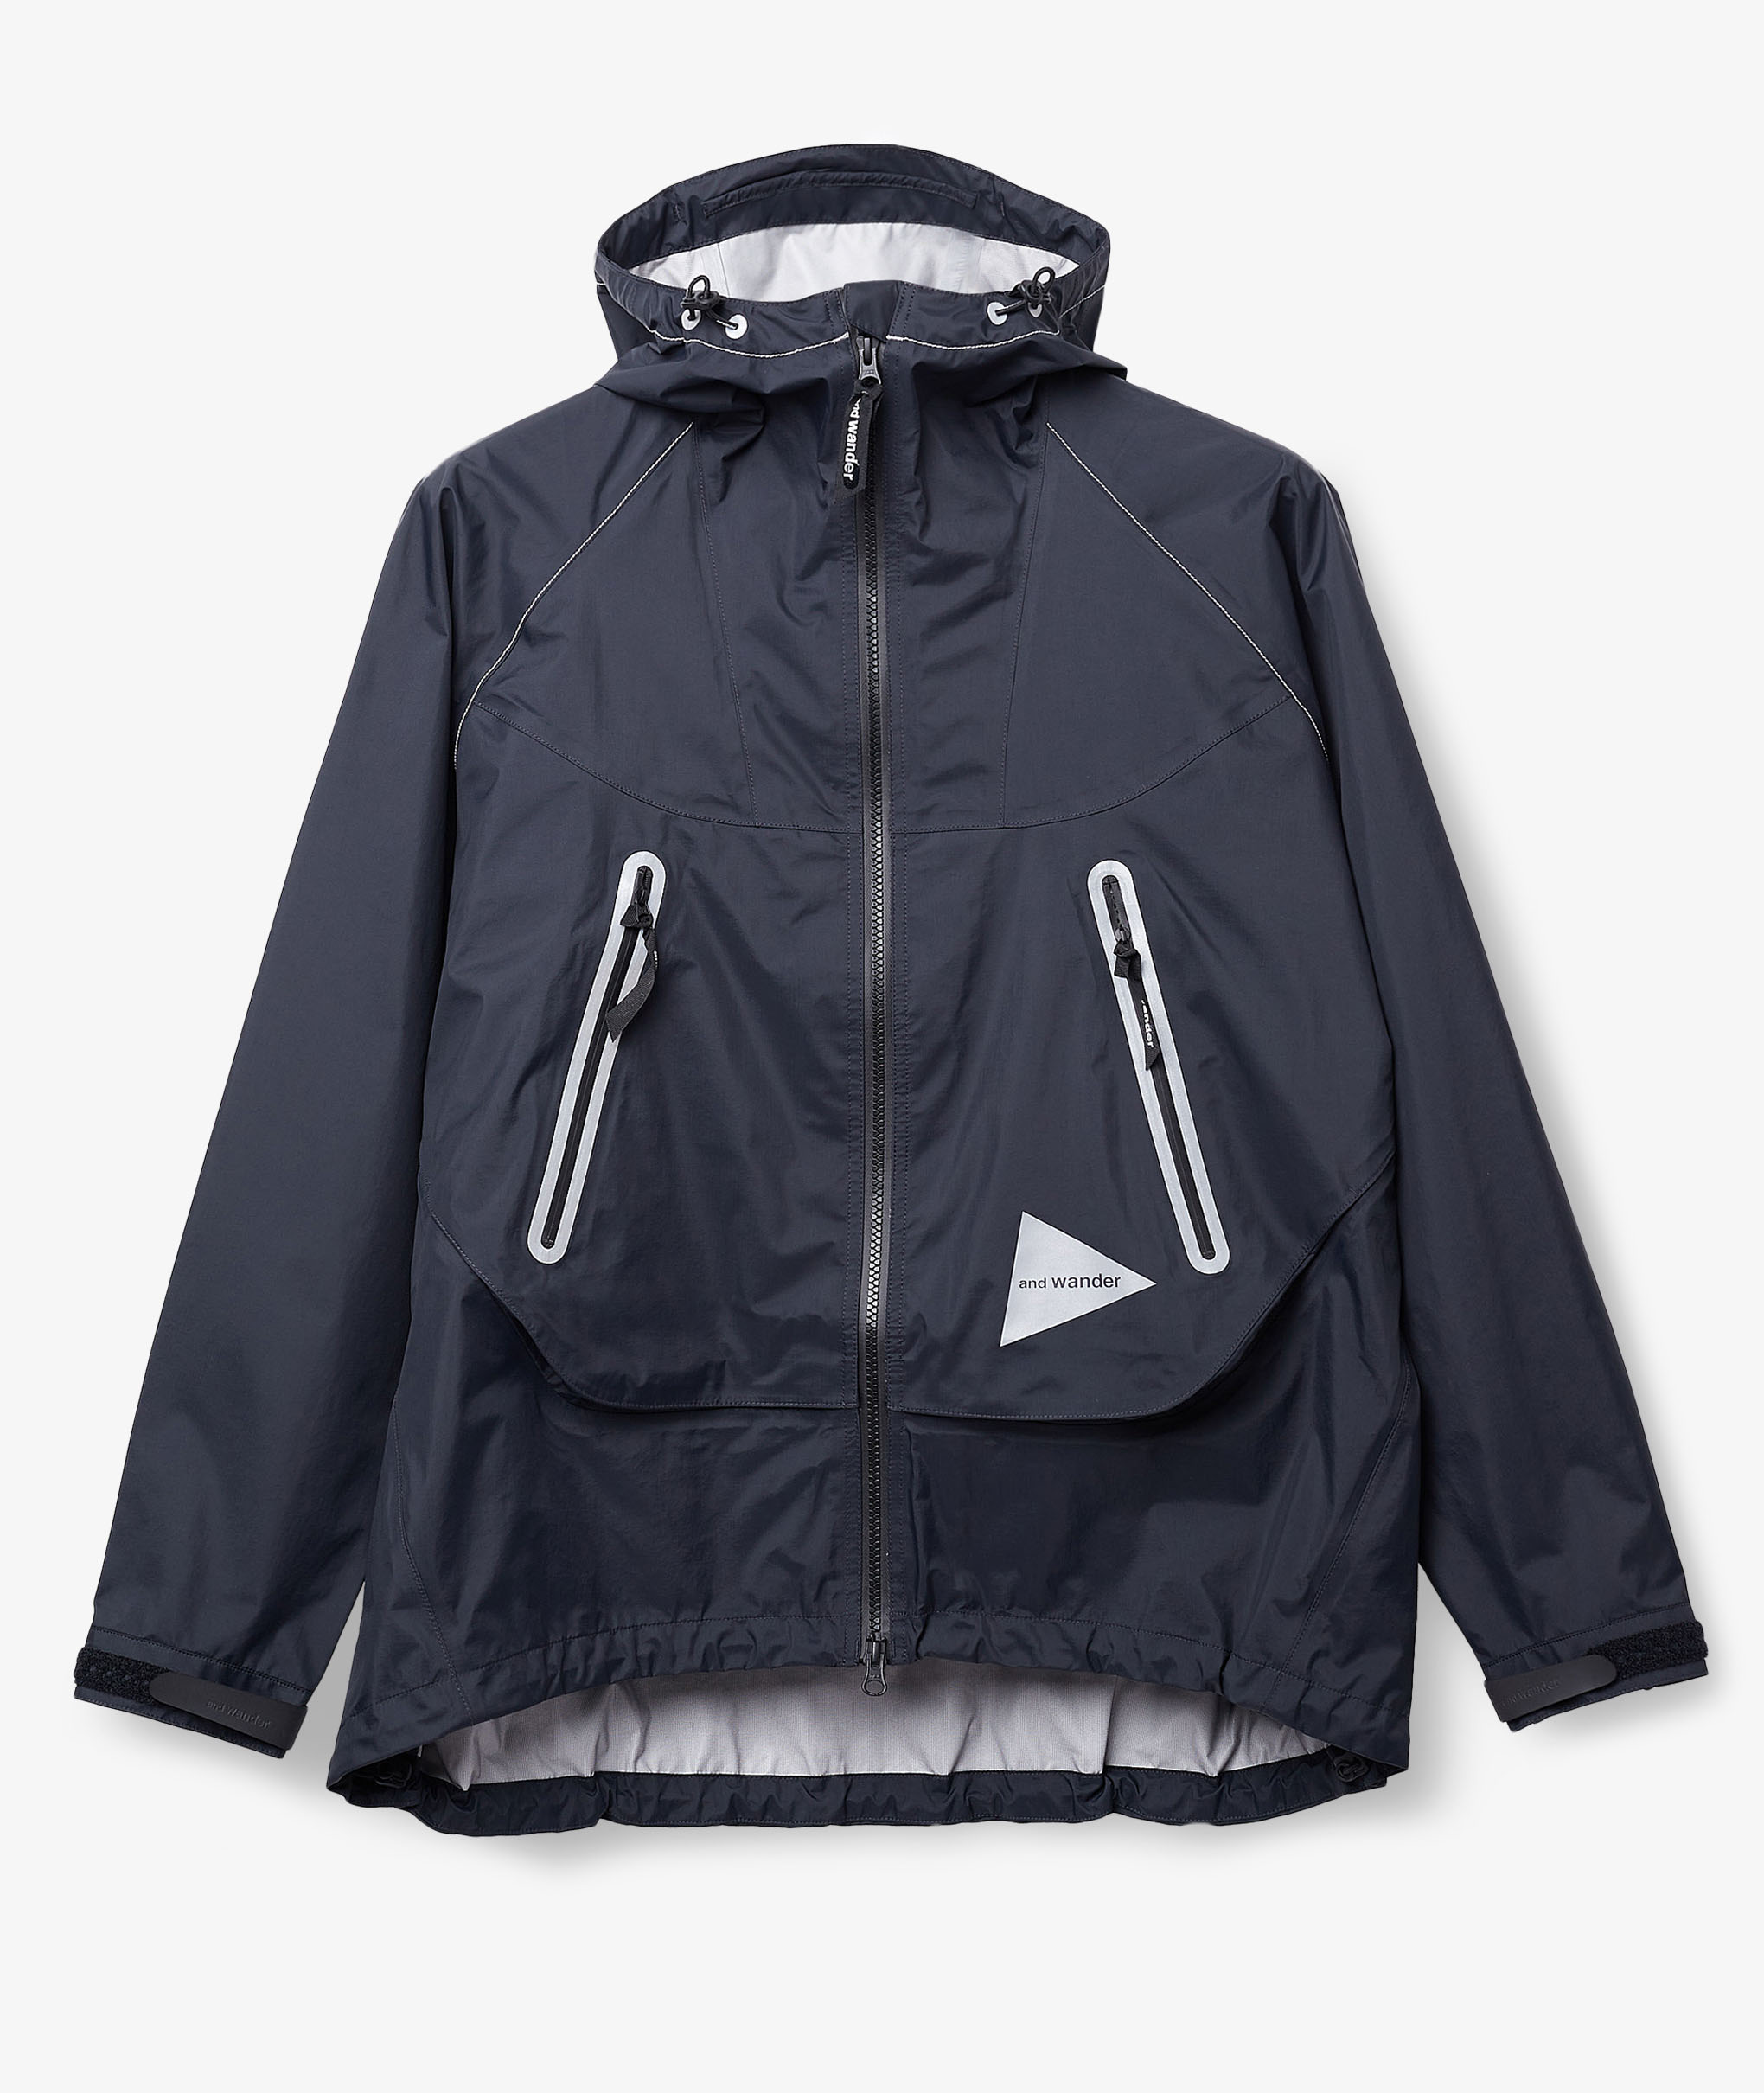 Norse Store  Shipping Worldwide - And Wander Loose Fitting Rain